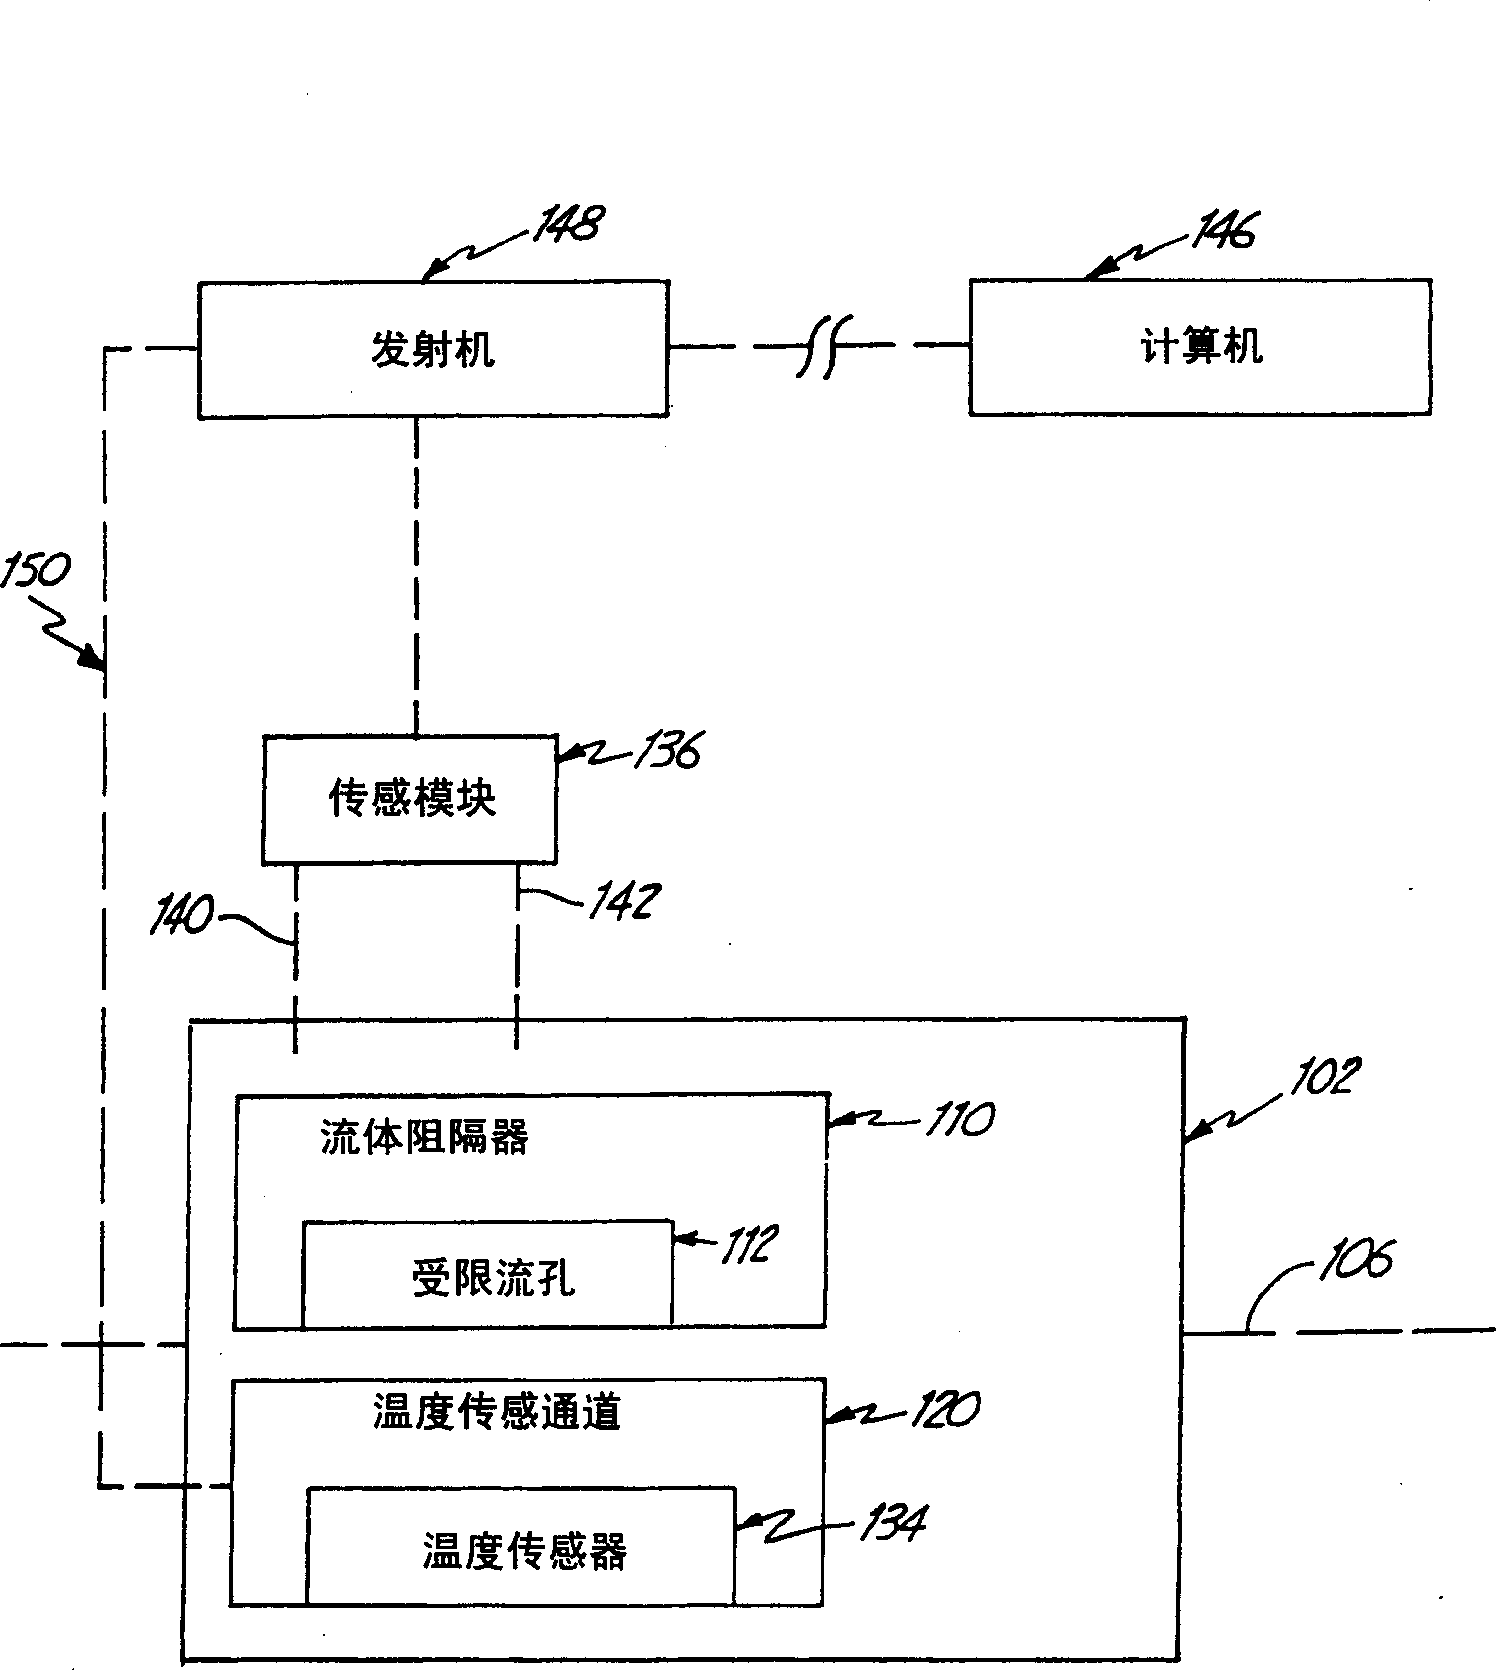 Process flow plate with temp. measurement feature